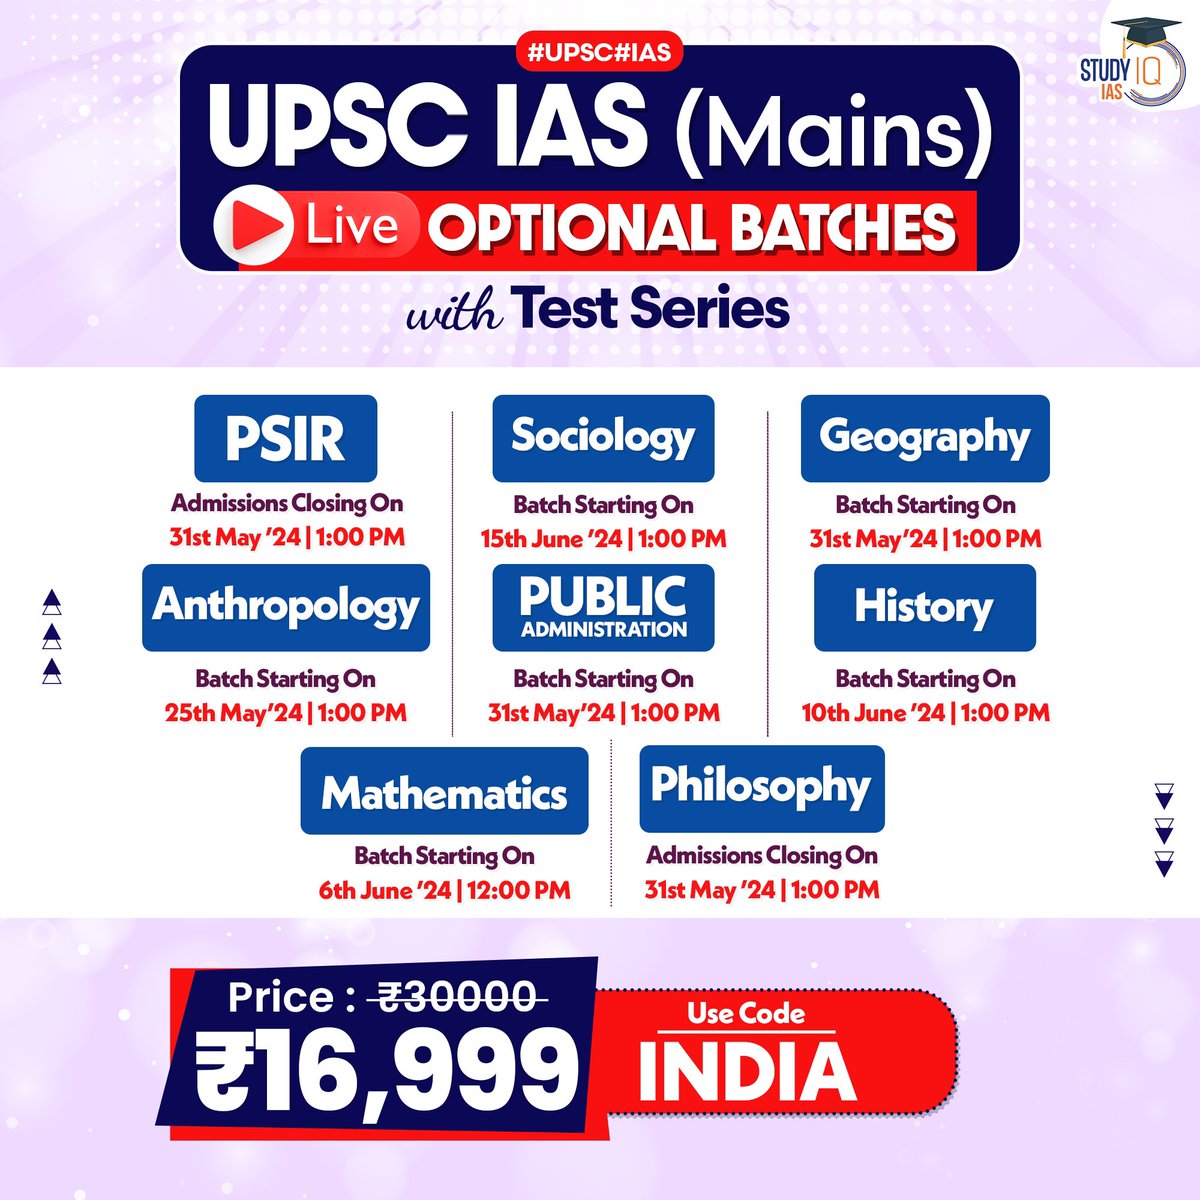 Dear Students, Optional plays a key role in UPSC CSE selections. StudyIQ IAS offers 8 Optionals taught by best faculties to help you Ace the examination. For any queries please reach out to: 080-6897-3353 Check out the courses here: bit.ly/3FEJnnJ